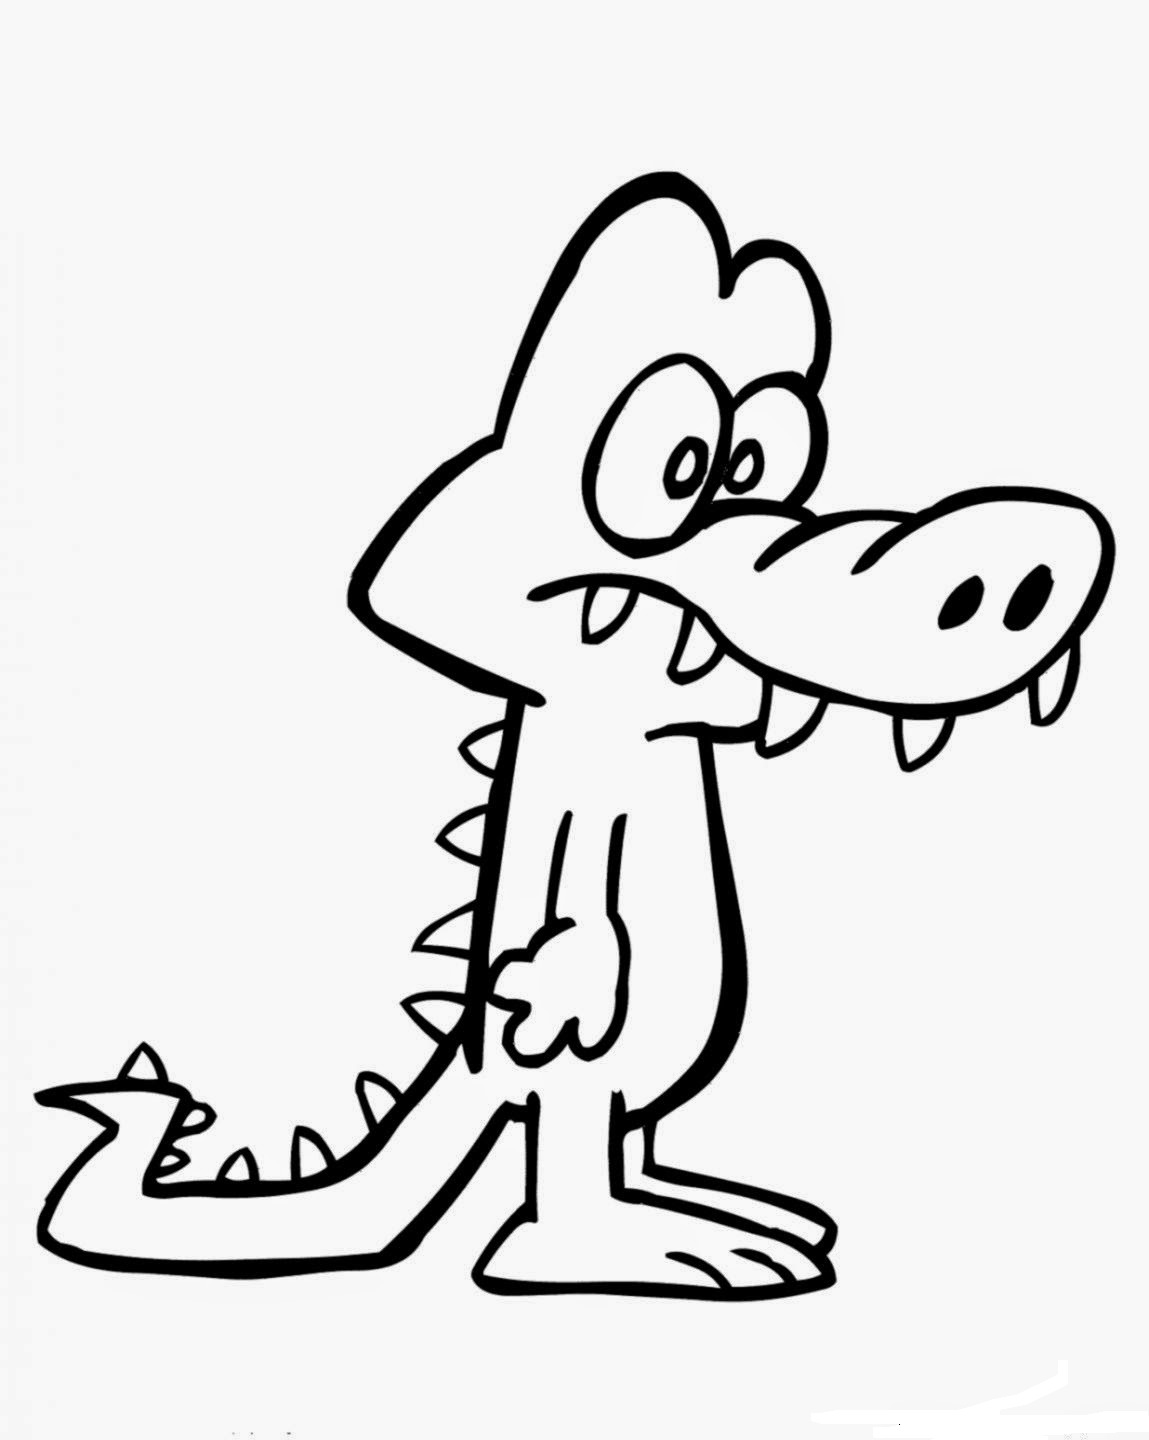 Sad Alligator Coloring Page - Free Printable Coloring Pages for Kids